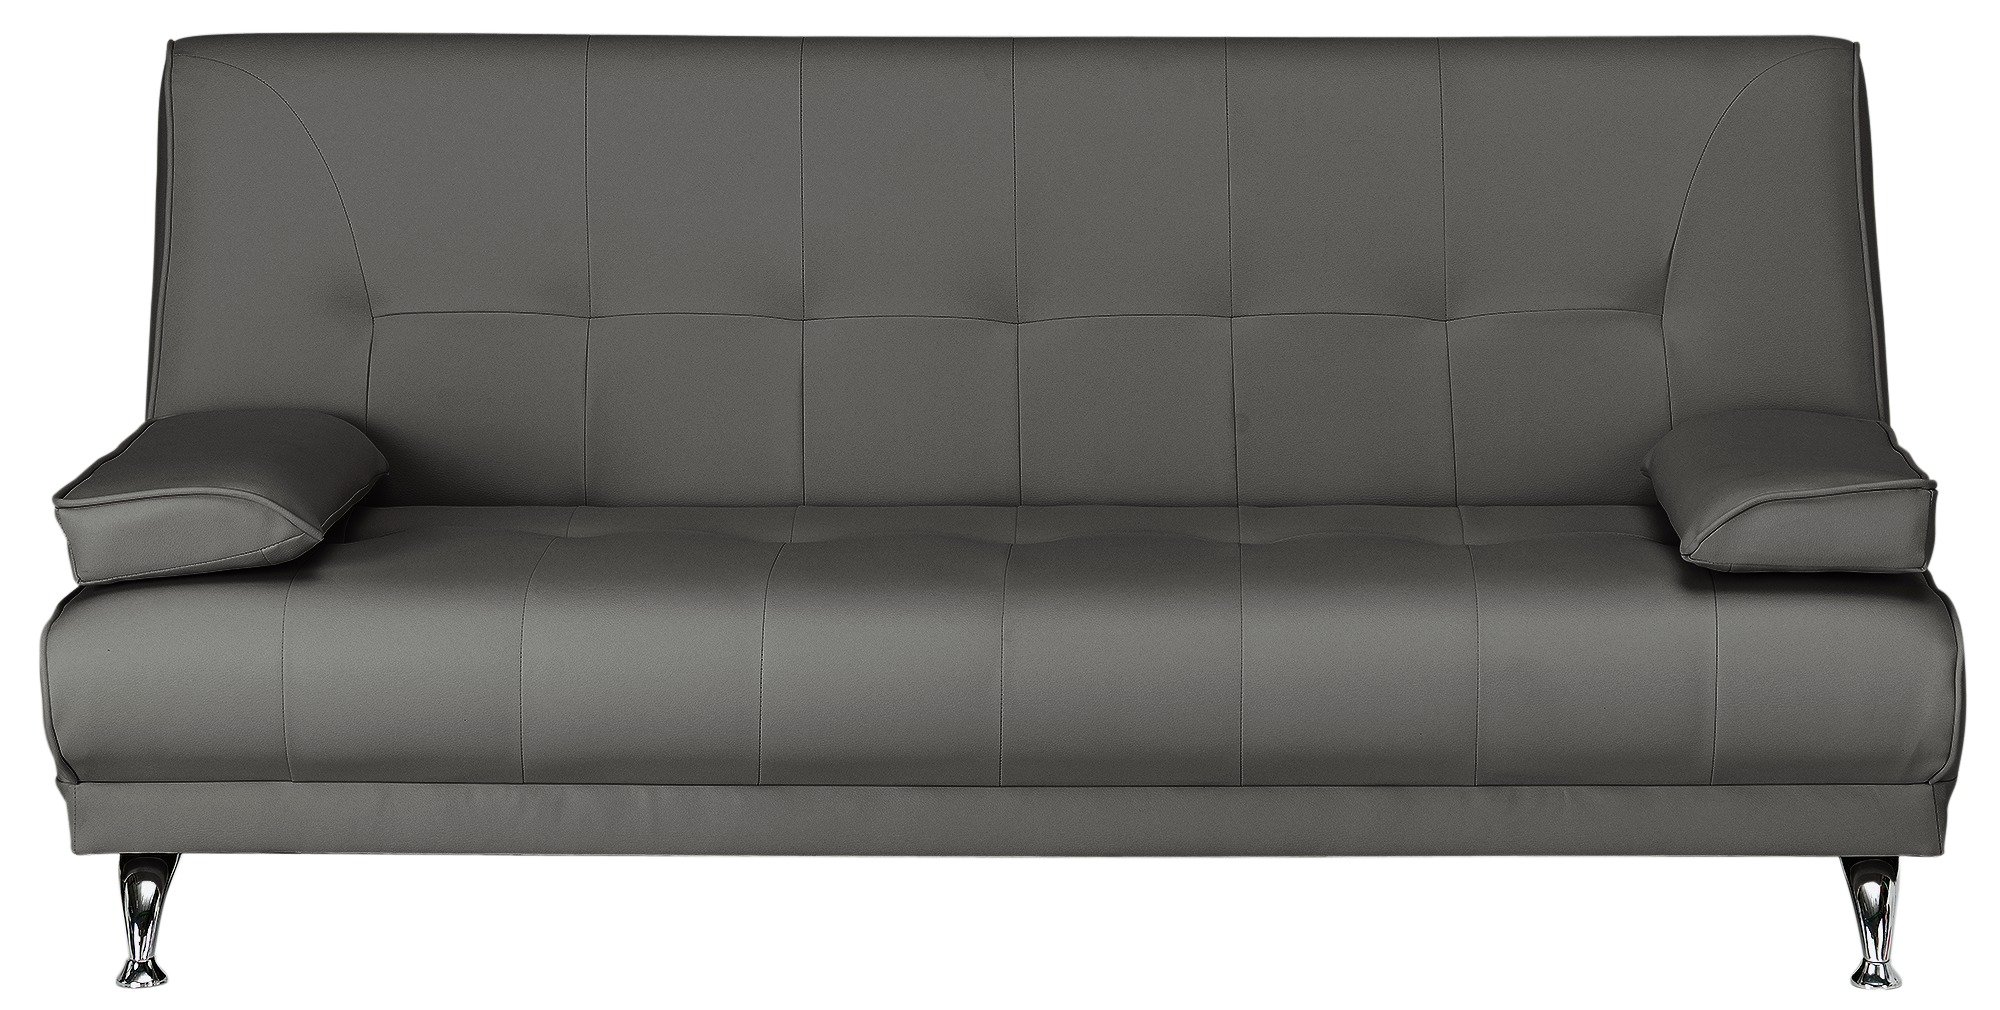 Argos Home Sicily 2 Seater Clic Clac Sofa Bed - Charcoal